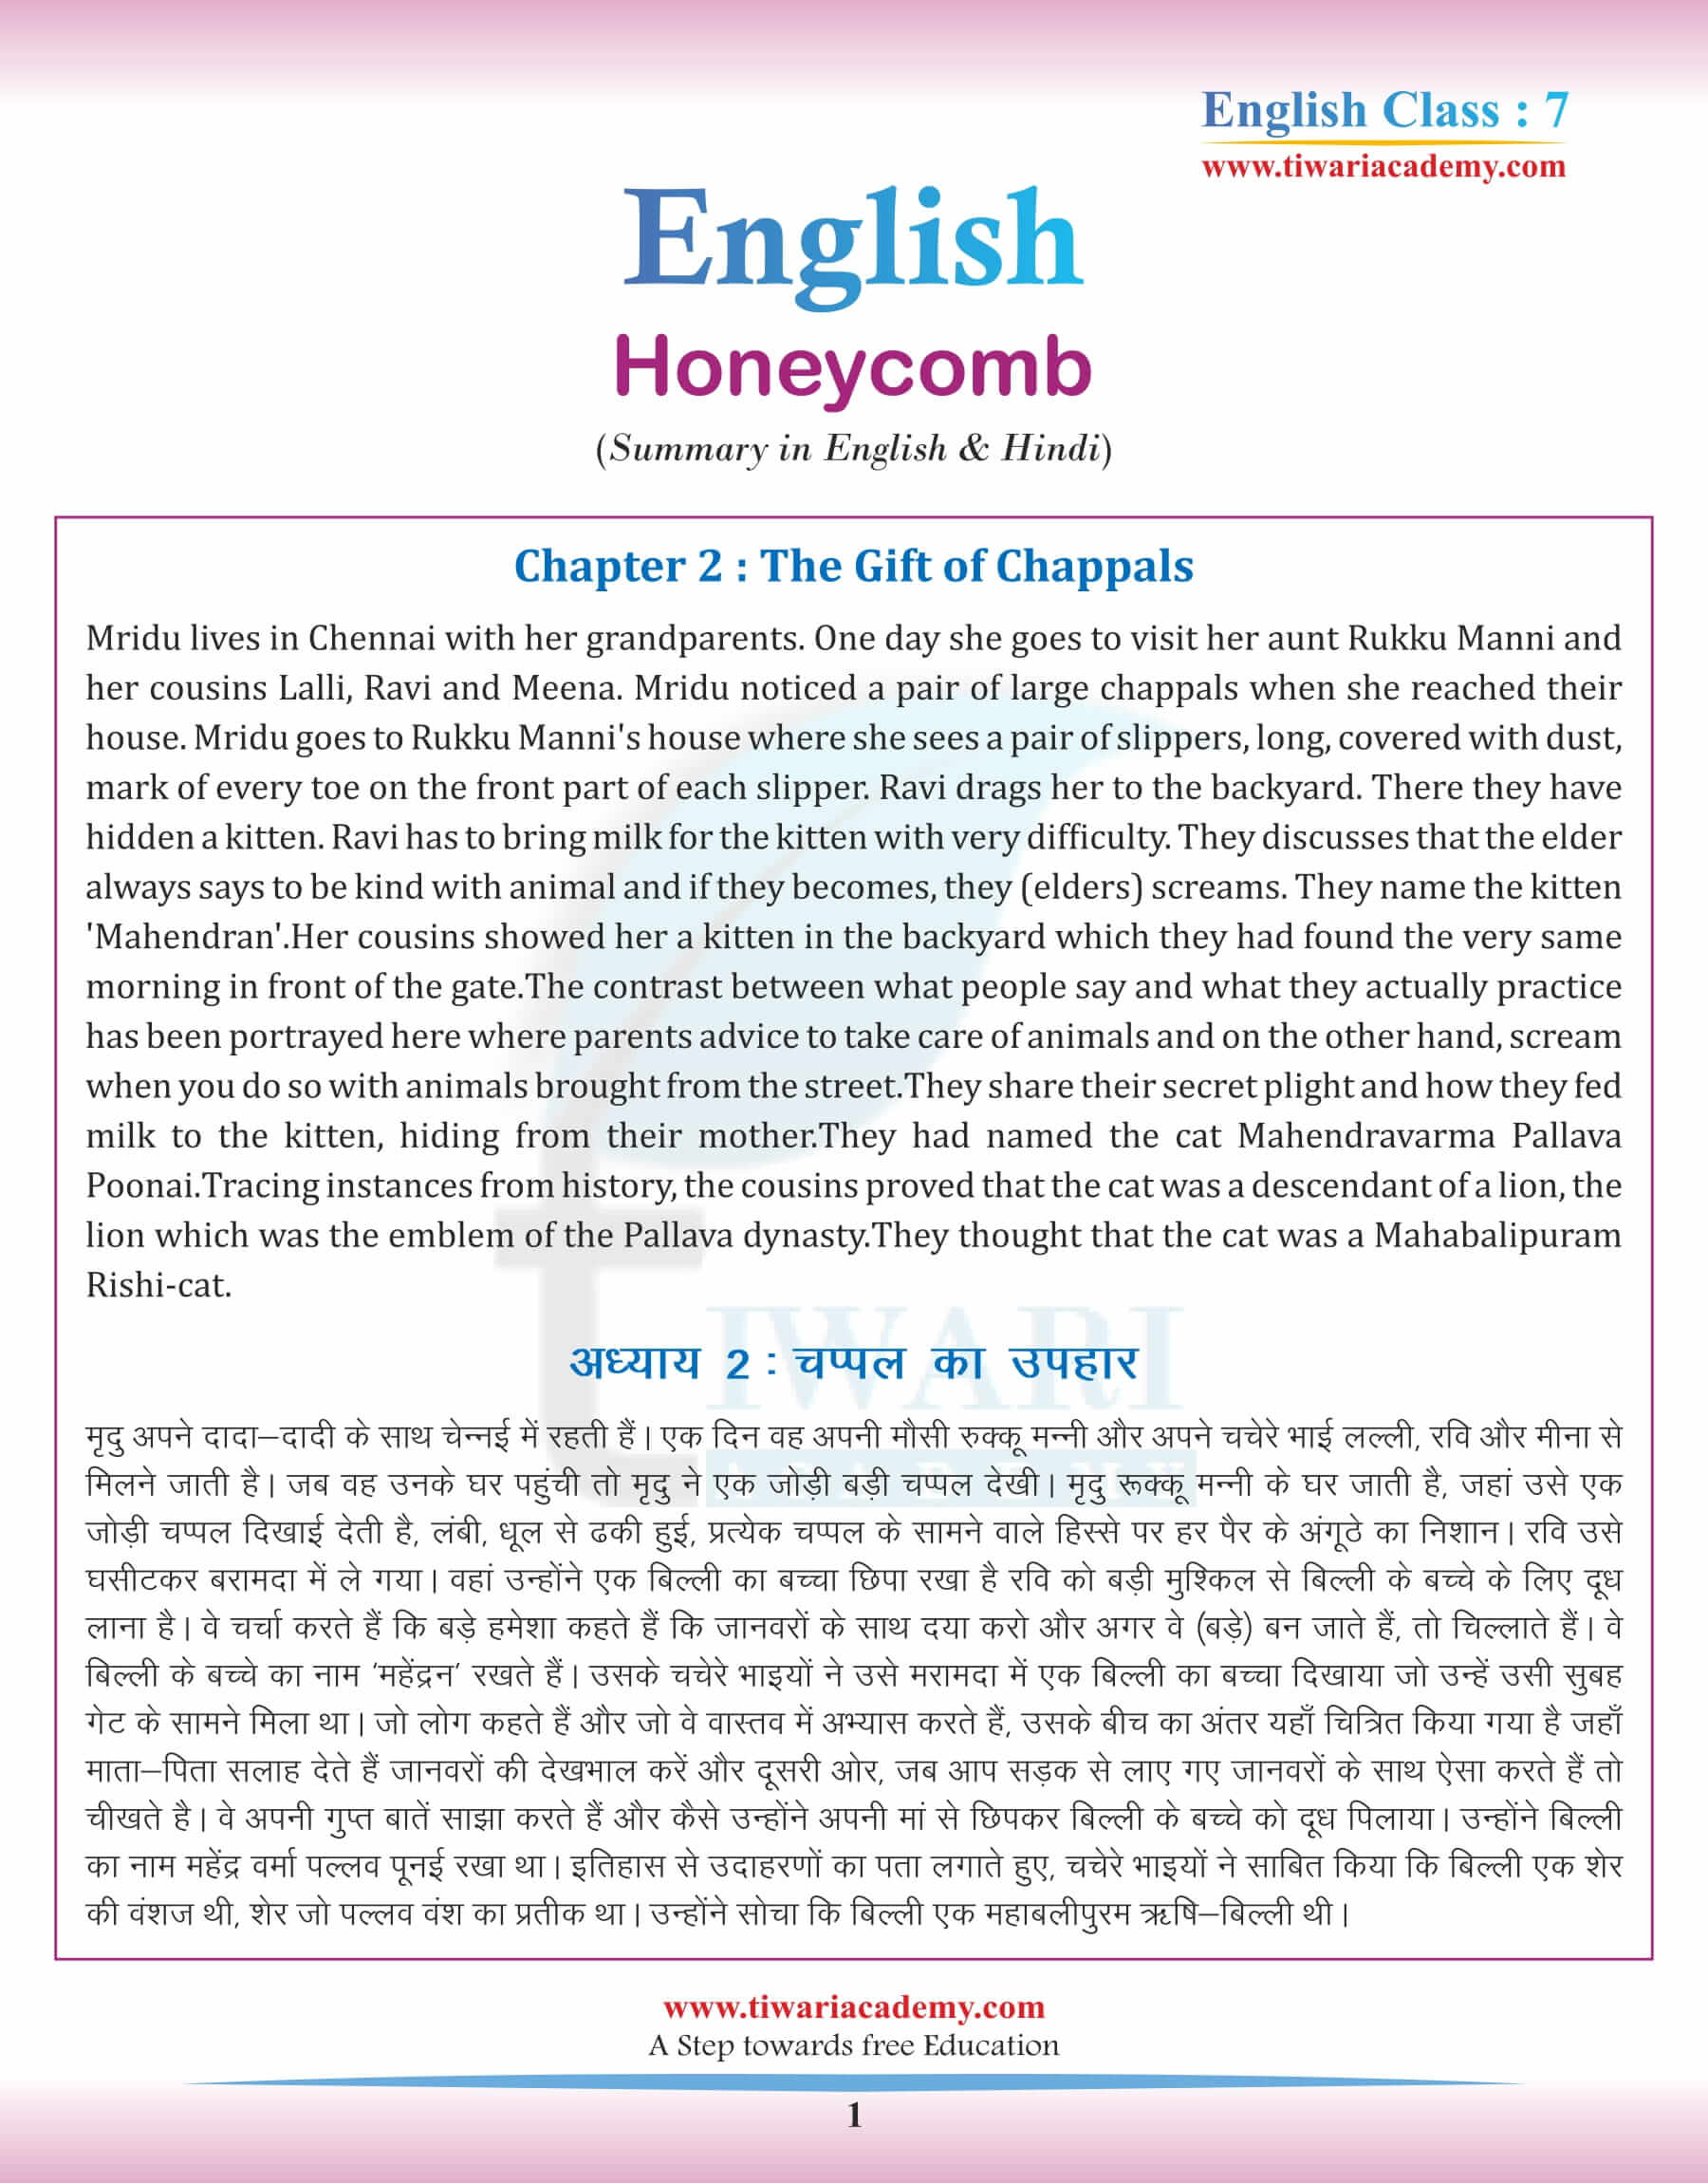 Class 7 English Chapter 2 Summary in Hindi and English